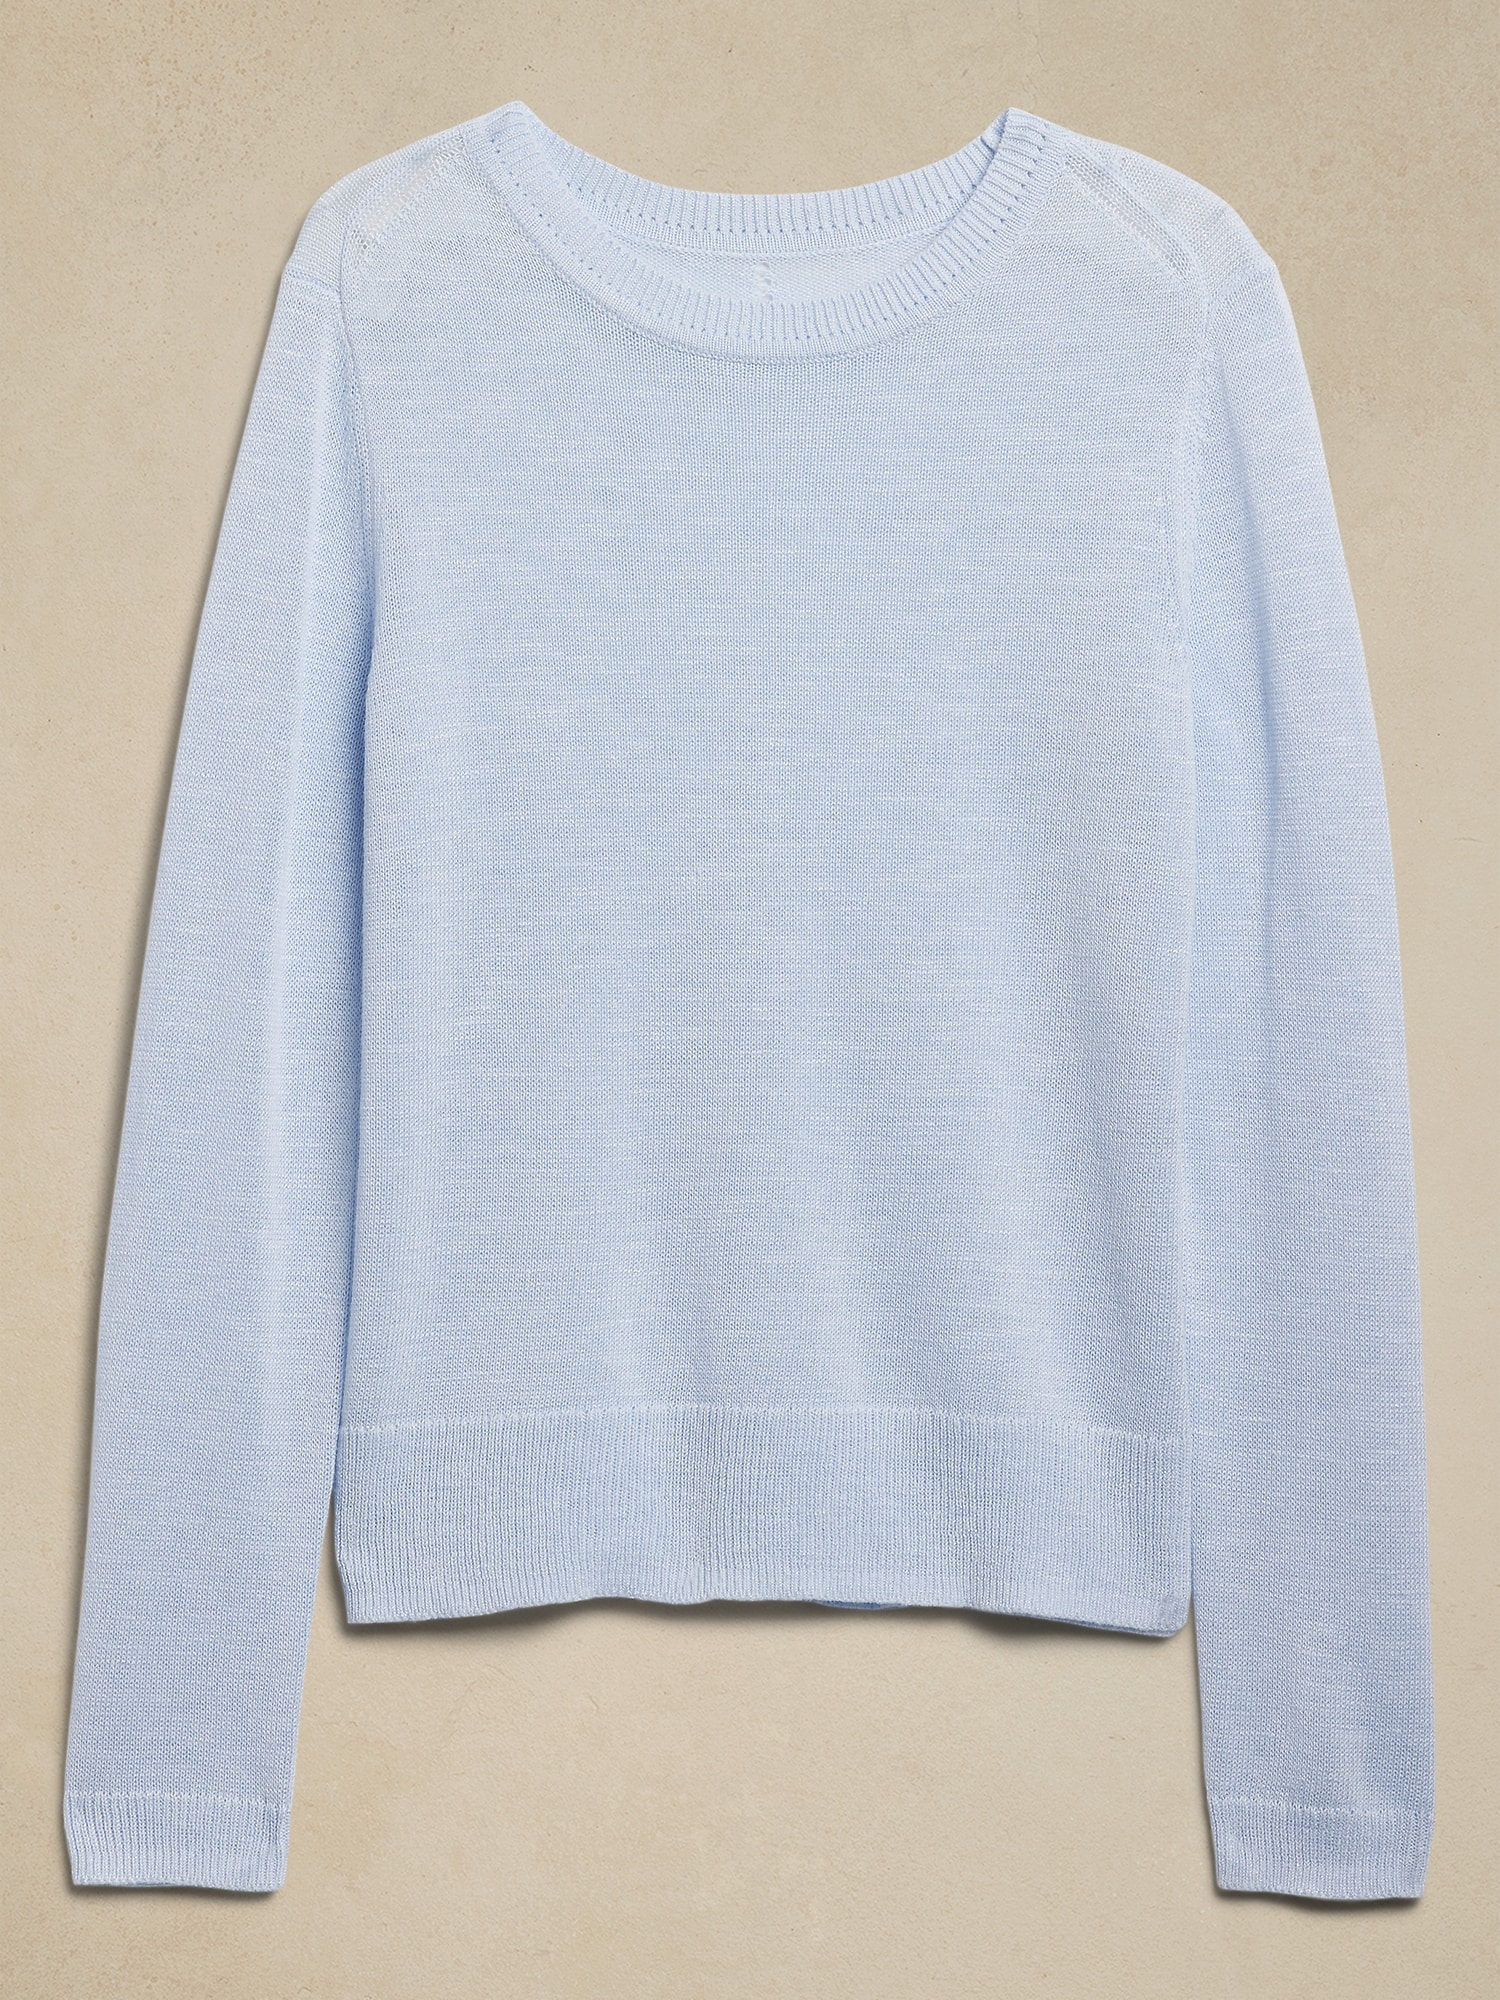 Pointelle Pullover Sweater